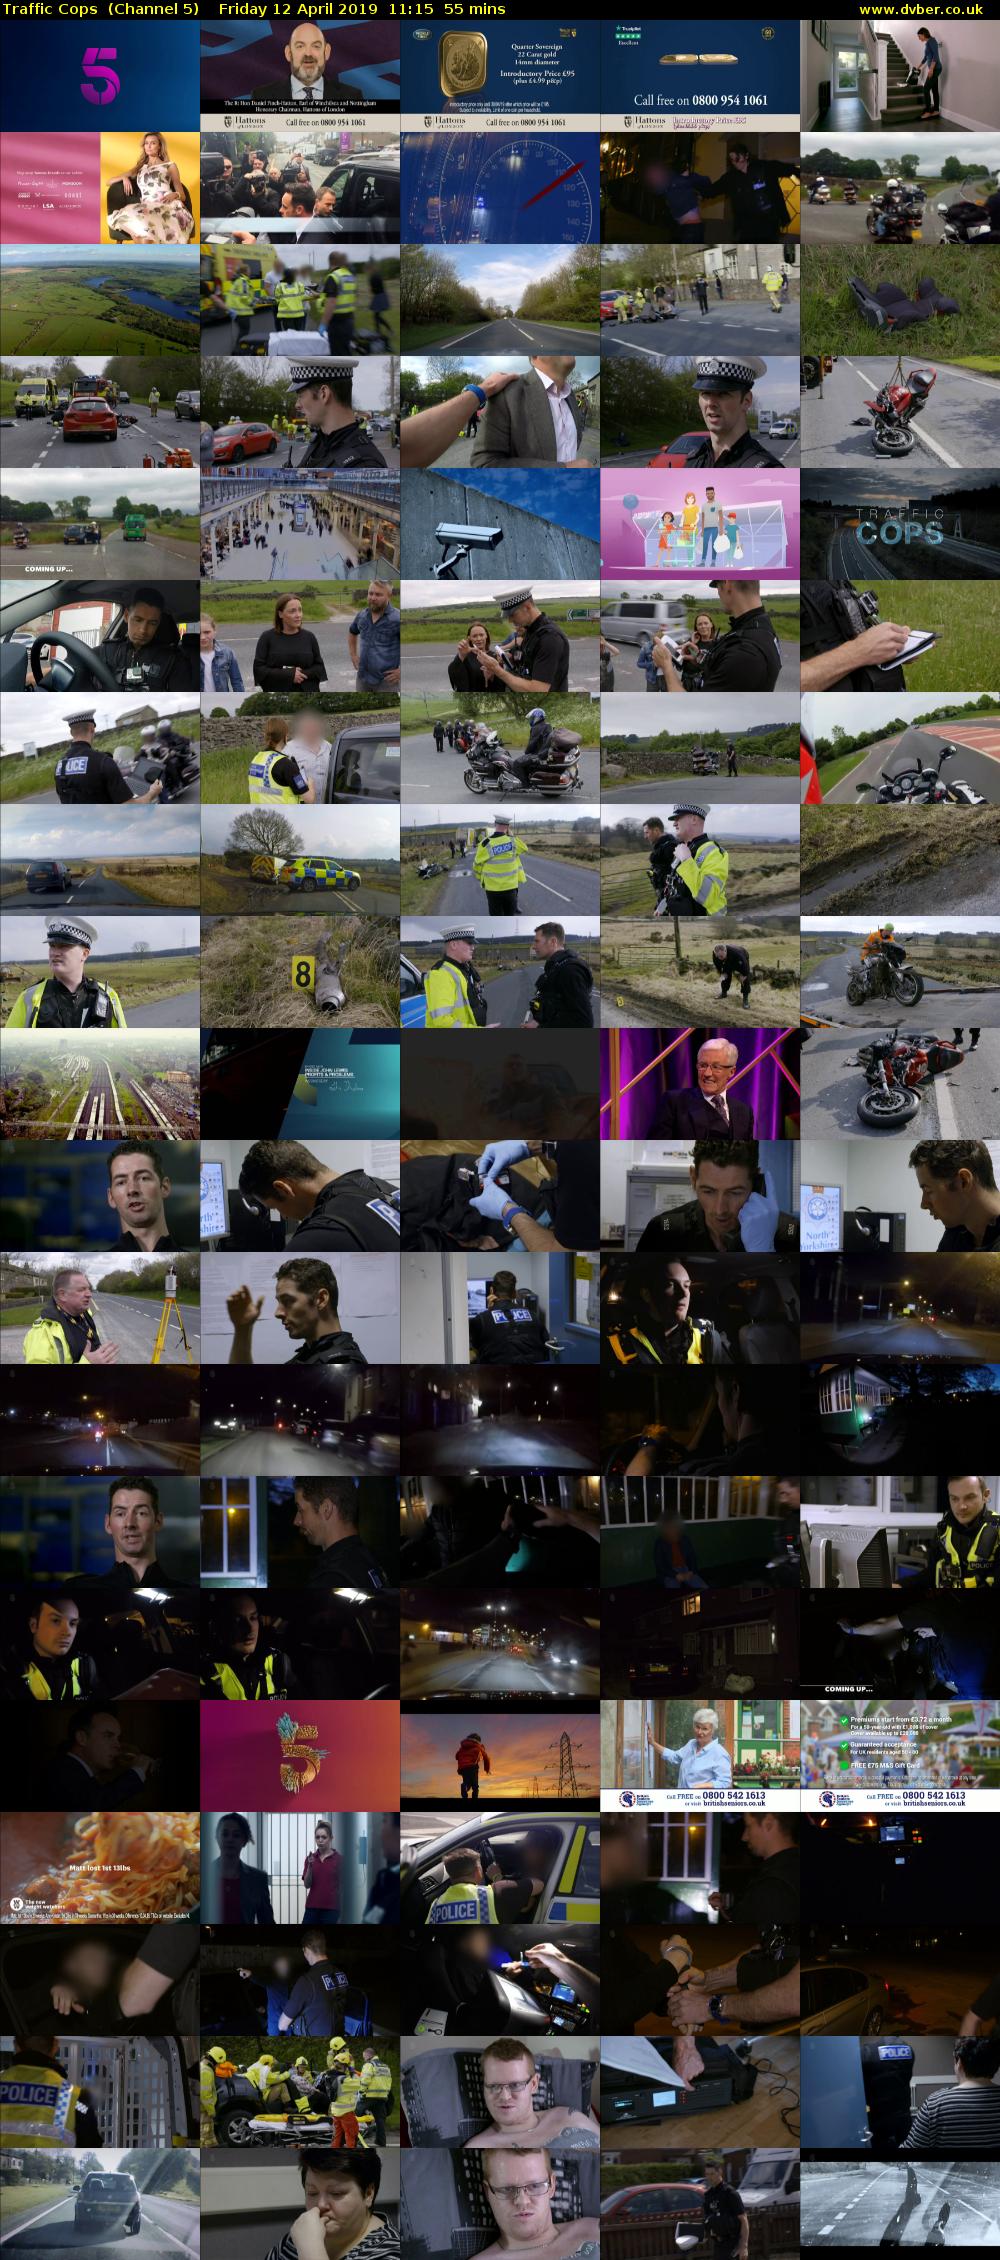 Traffic Cops  (Channel 5) Friday 12 April 2019 11:15 - 12:10